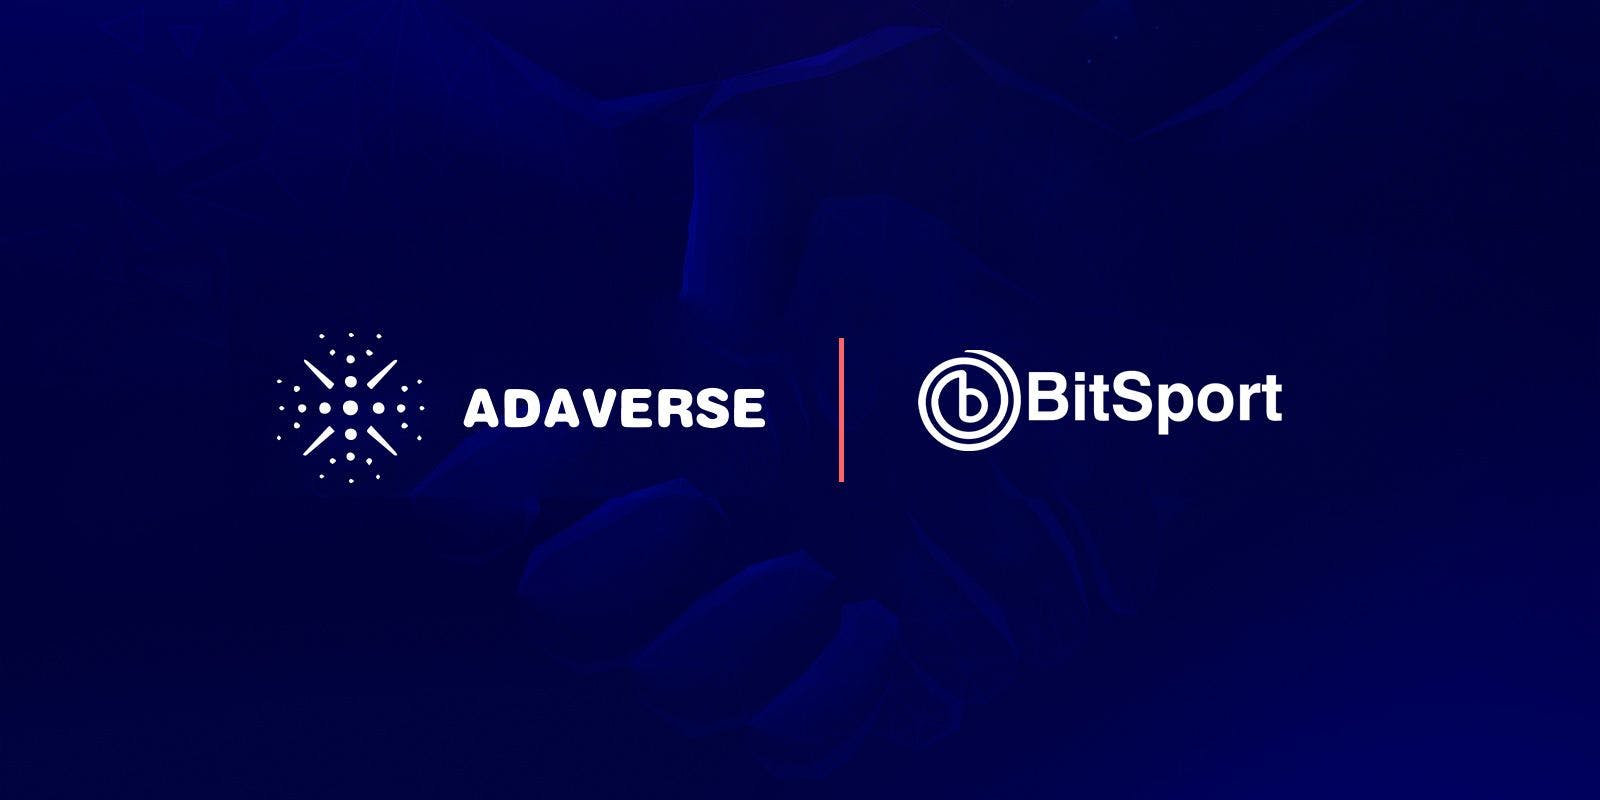 Adaverse Backs BitSport's Play-and-Earn Gaming Platform As It Launches its AI-Powered Game on Cardano Blockchain